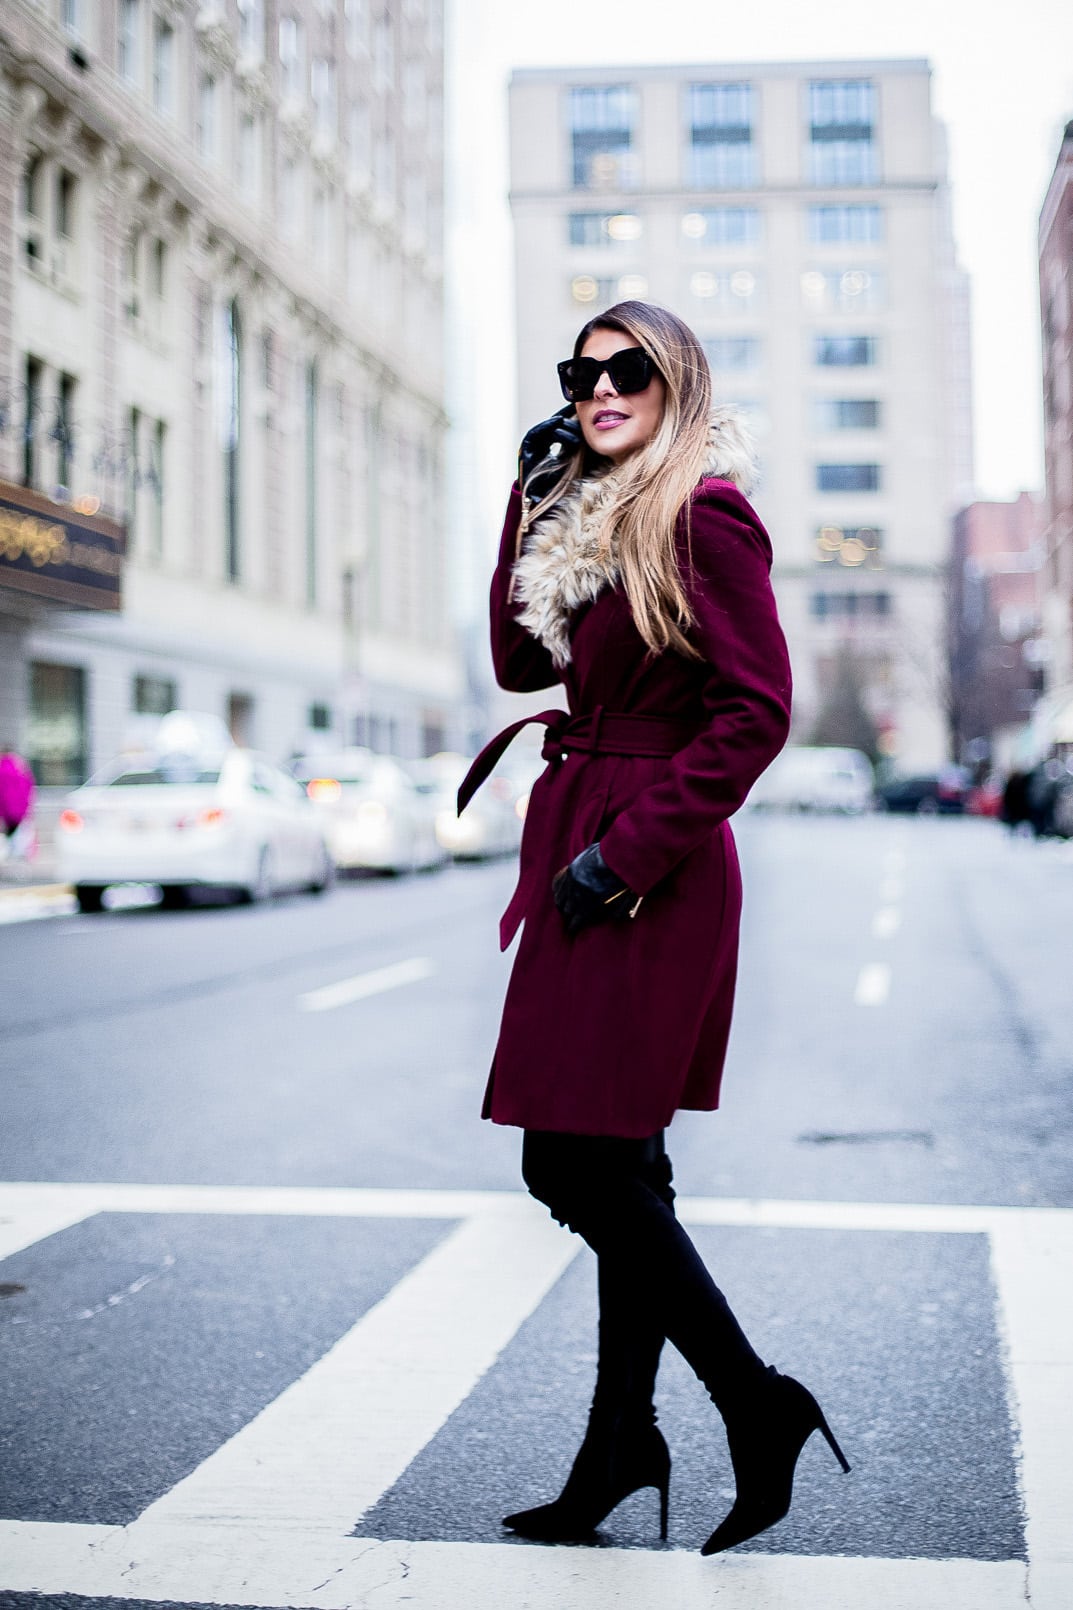 Pam Hetlinger, The Girl From Panama wearing a Faux-Fur Collared Long coat, Faux-leather leggings, delman over the knee boots, and celine sunglasses.